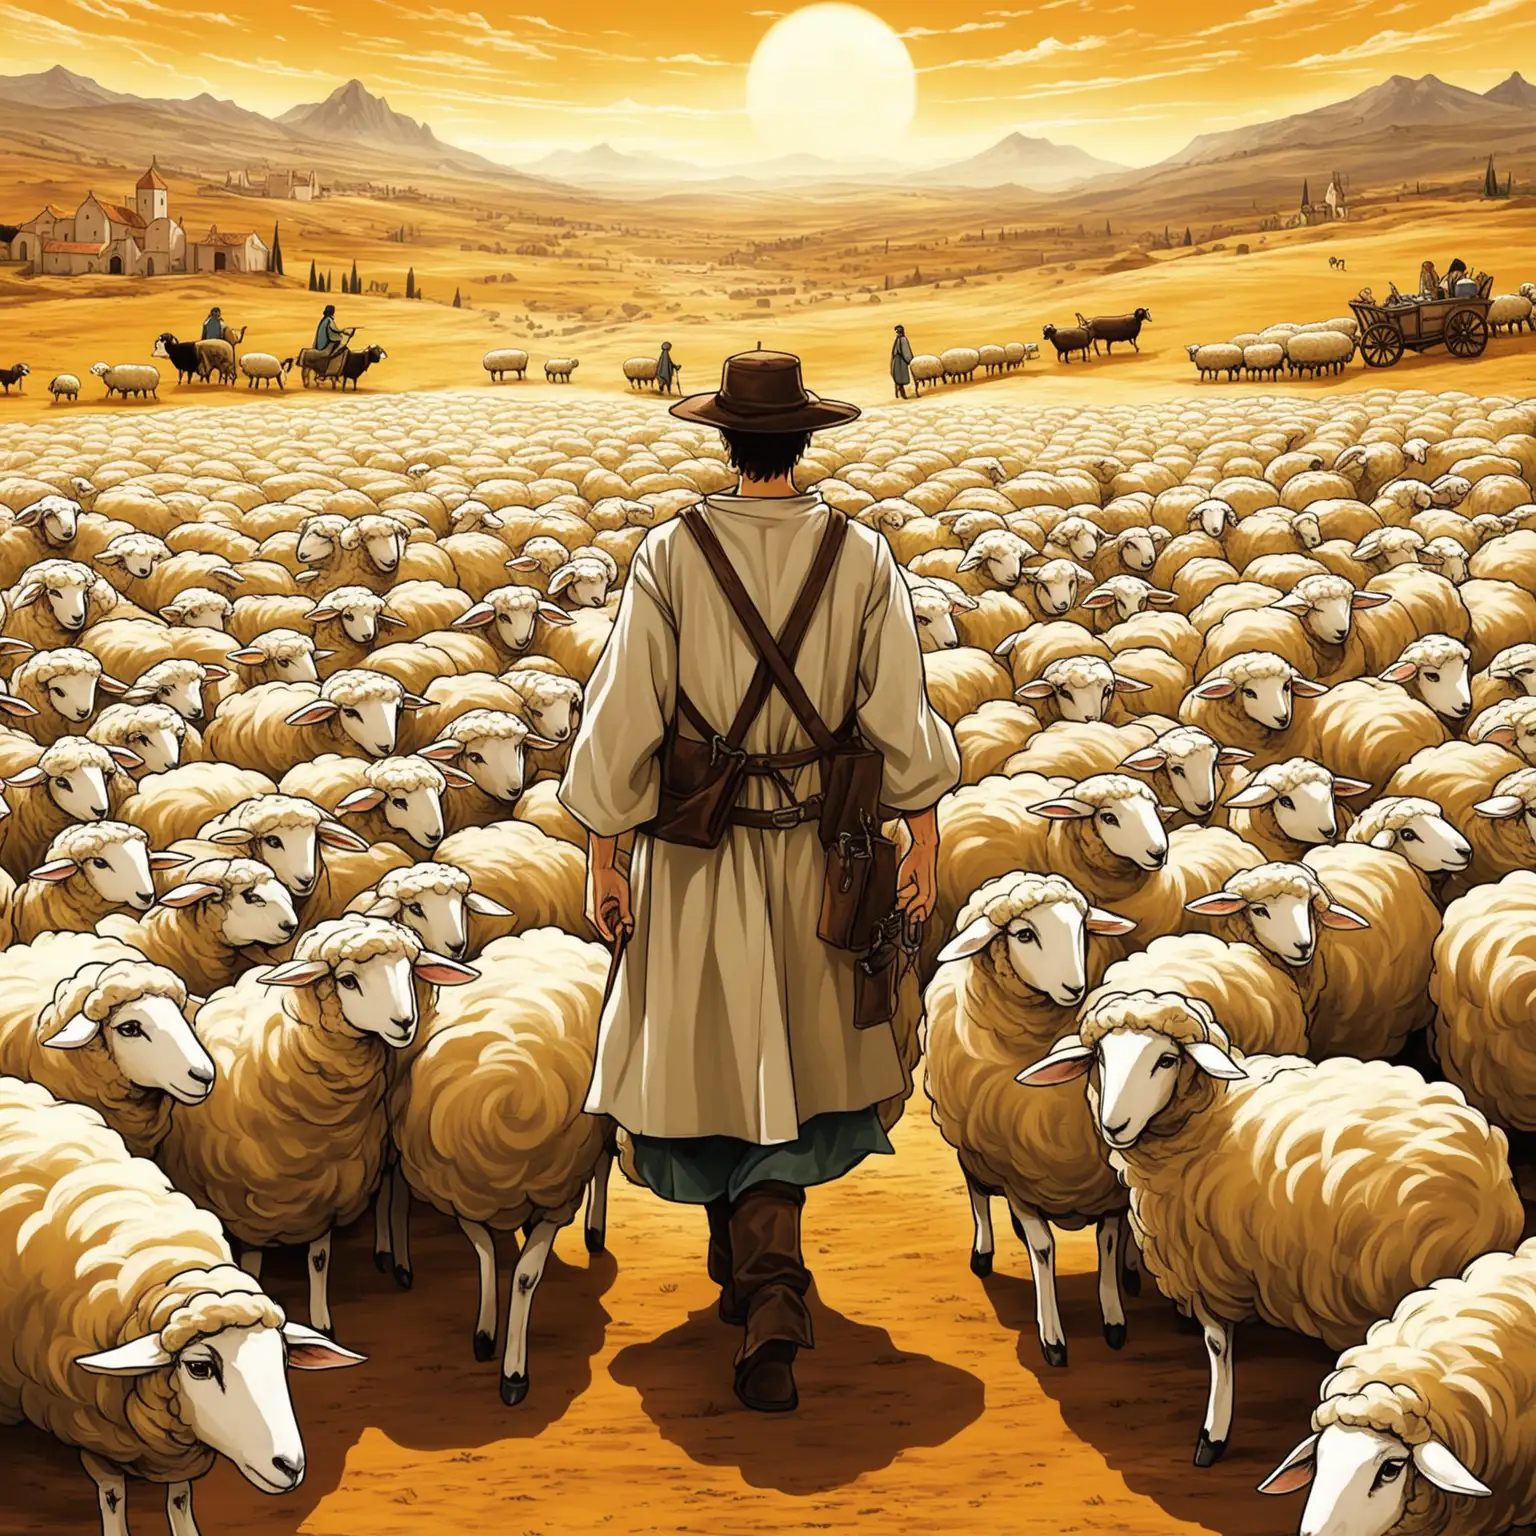 The protagonist Santiago in the novel "The Alchemist" is herding sheep